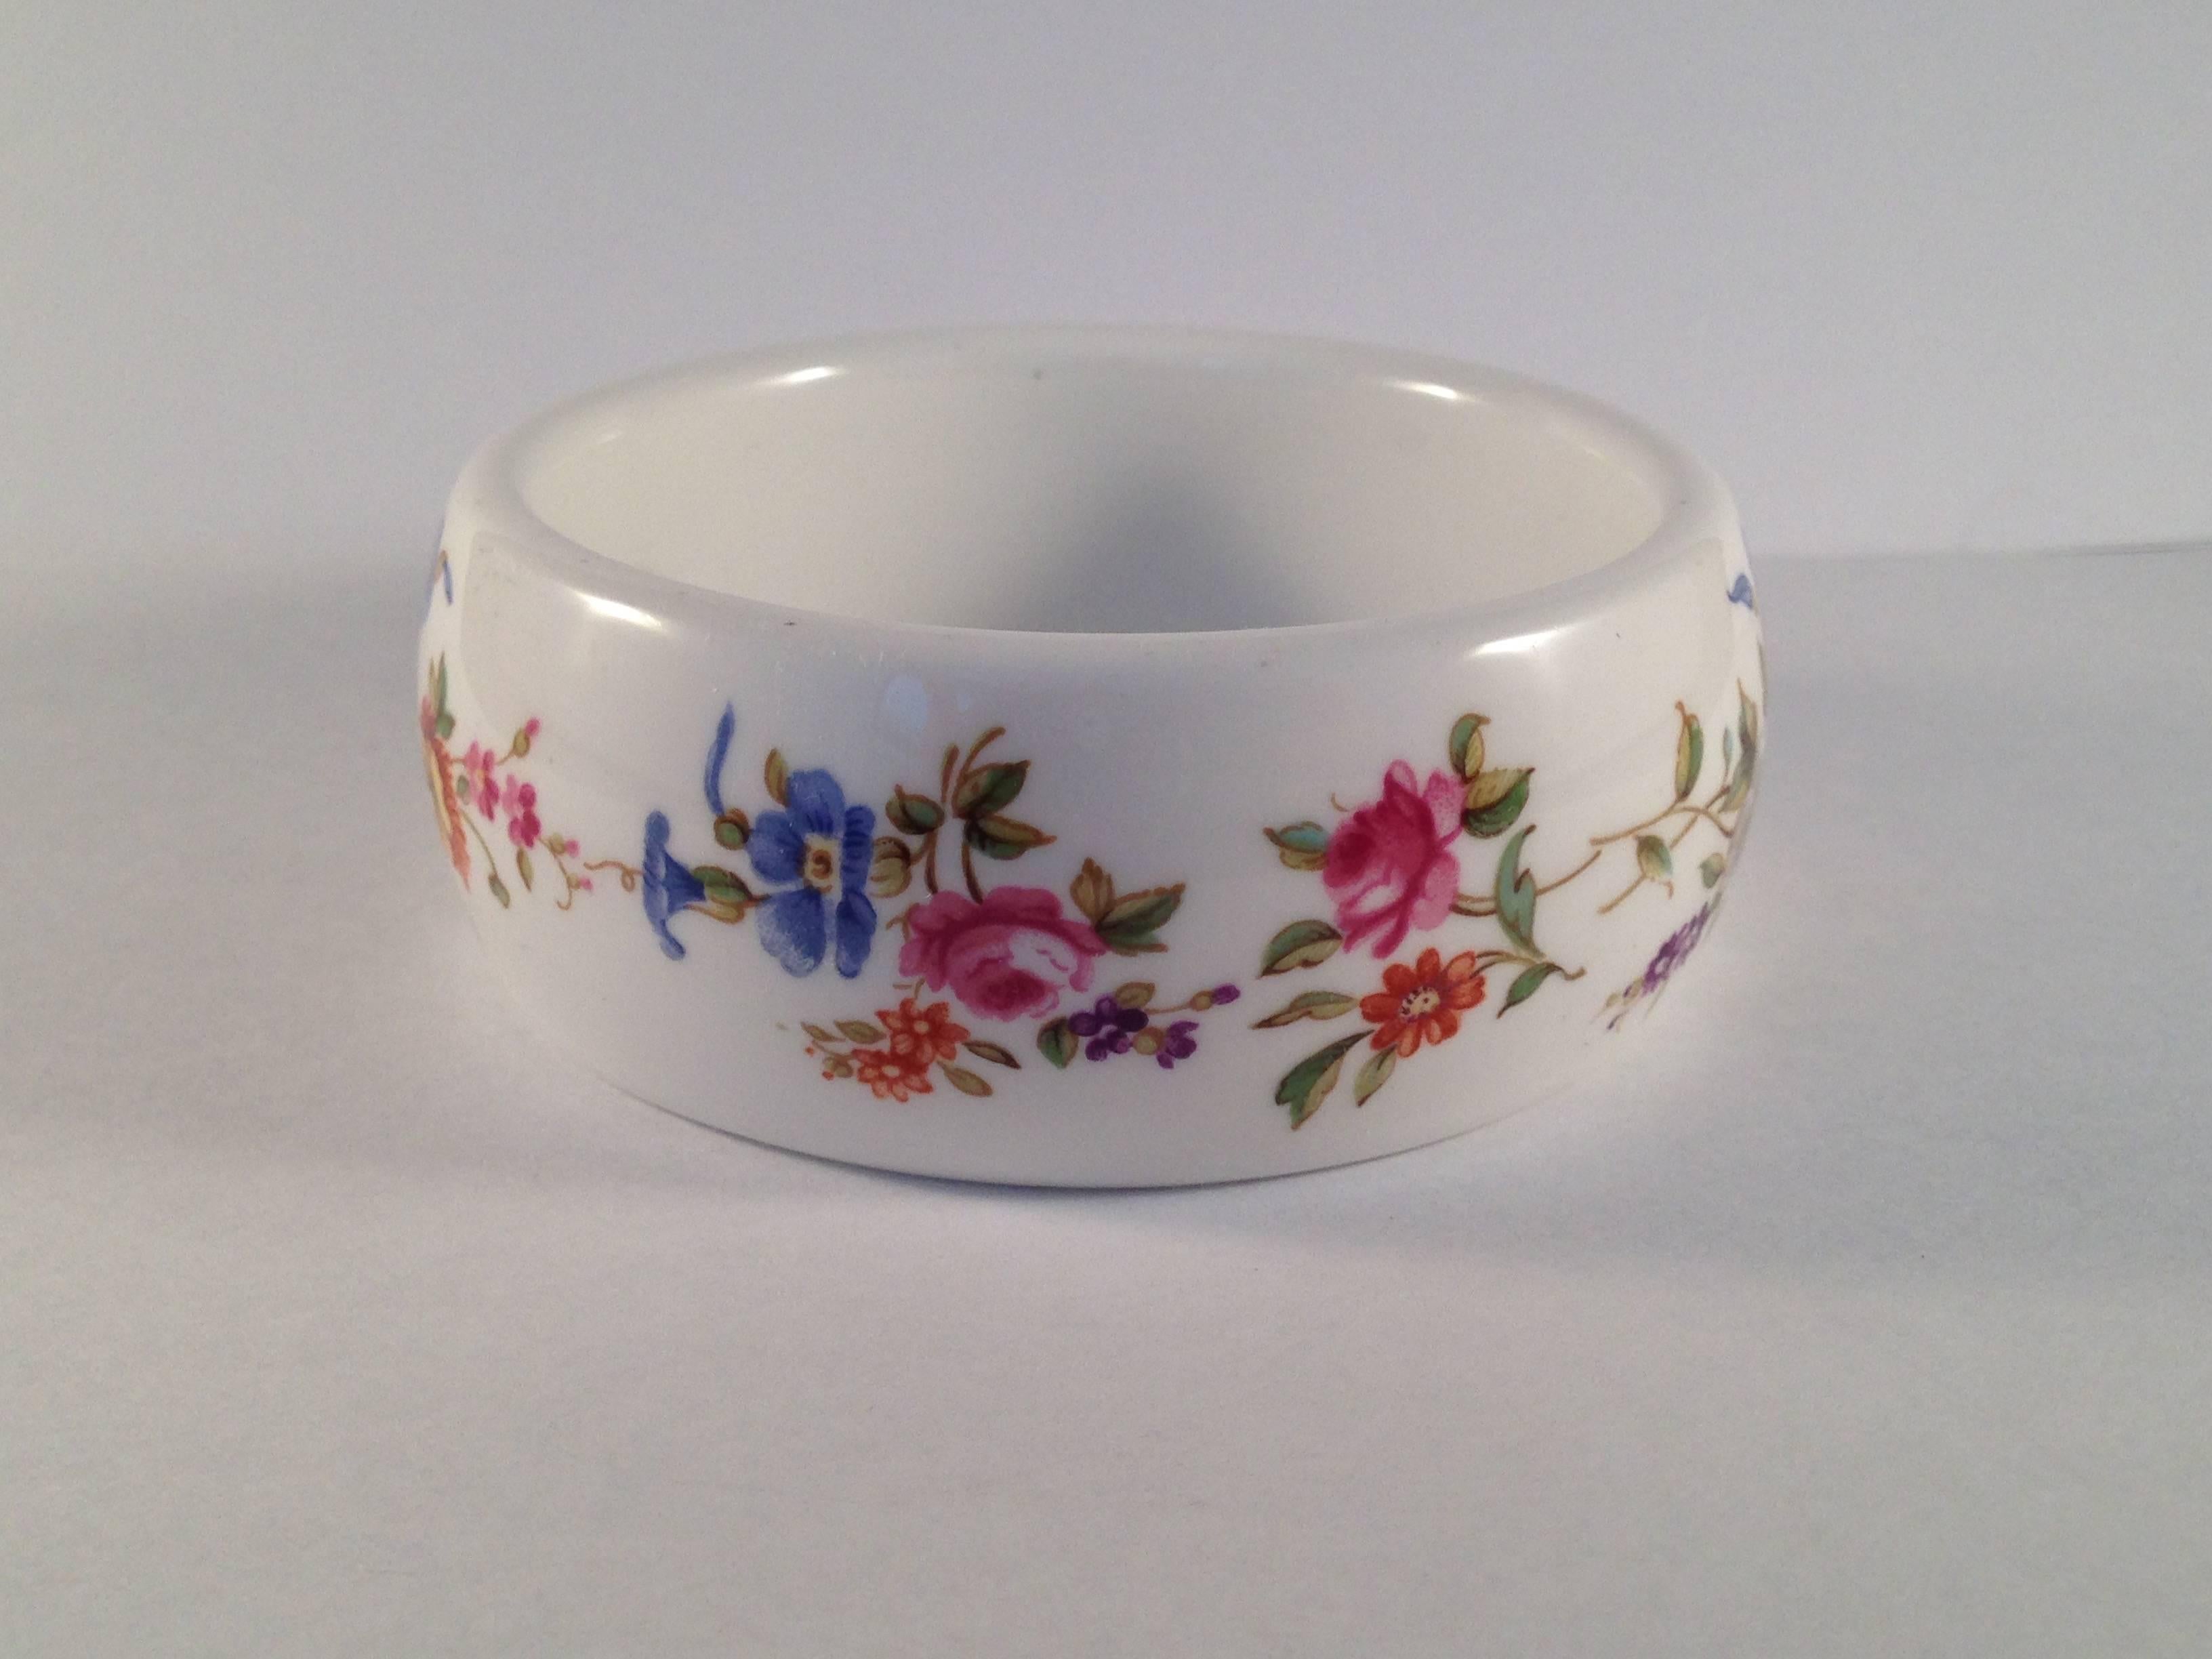 This is a bone china bracelet designed by Kenneth Jay Lane for the Royal Worcester Company. In 1976, Lane went to the Royal Worchester headquarters in England and chose several of their classic bone china patterns to fashion into necklaces and